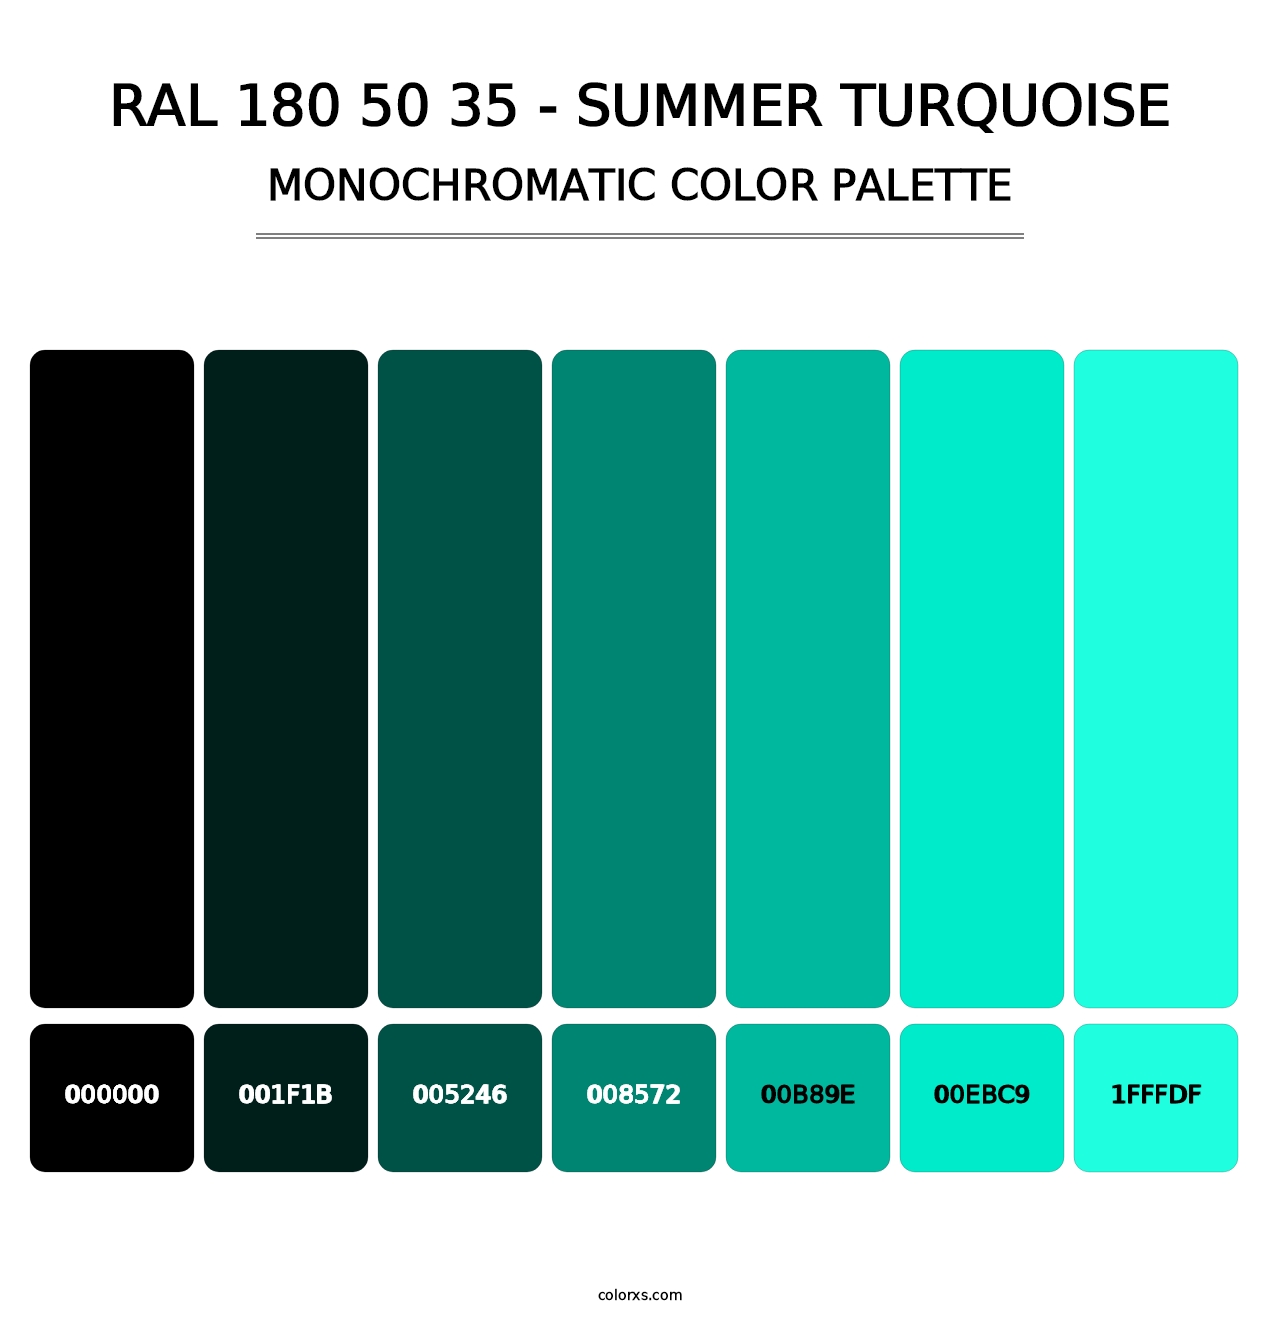 RAL 180 50 35 - Summer Turquoise - Monochromatic Color Palette